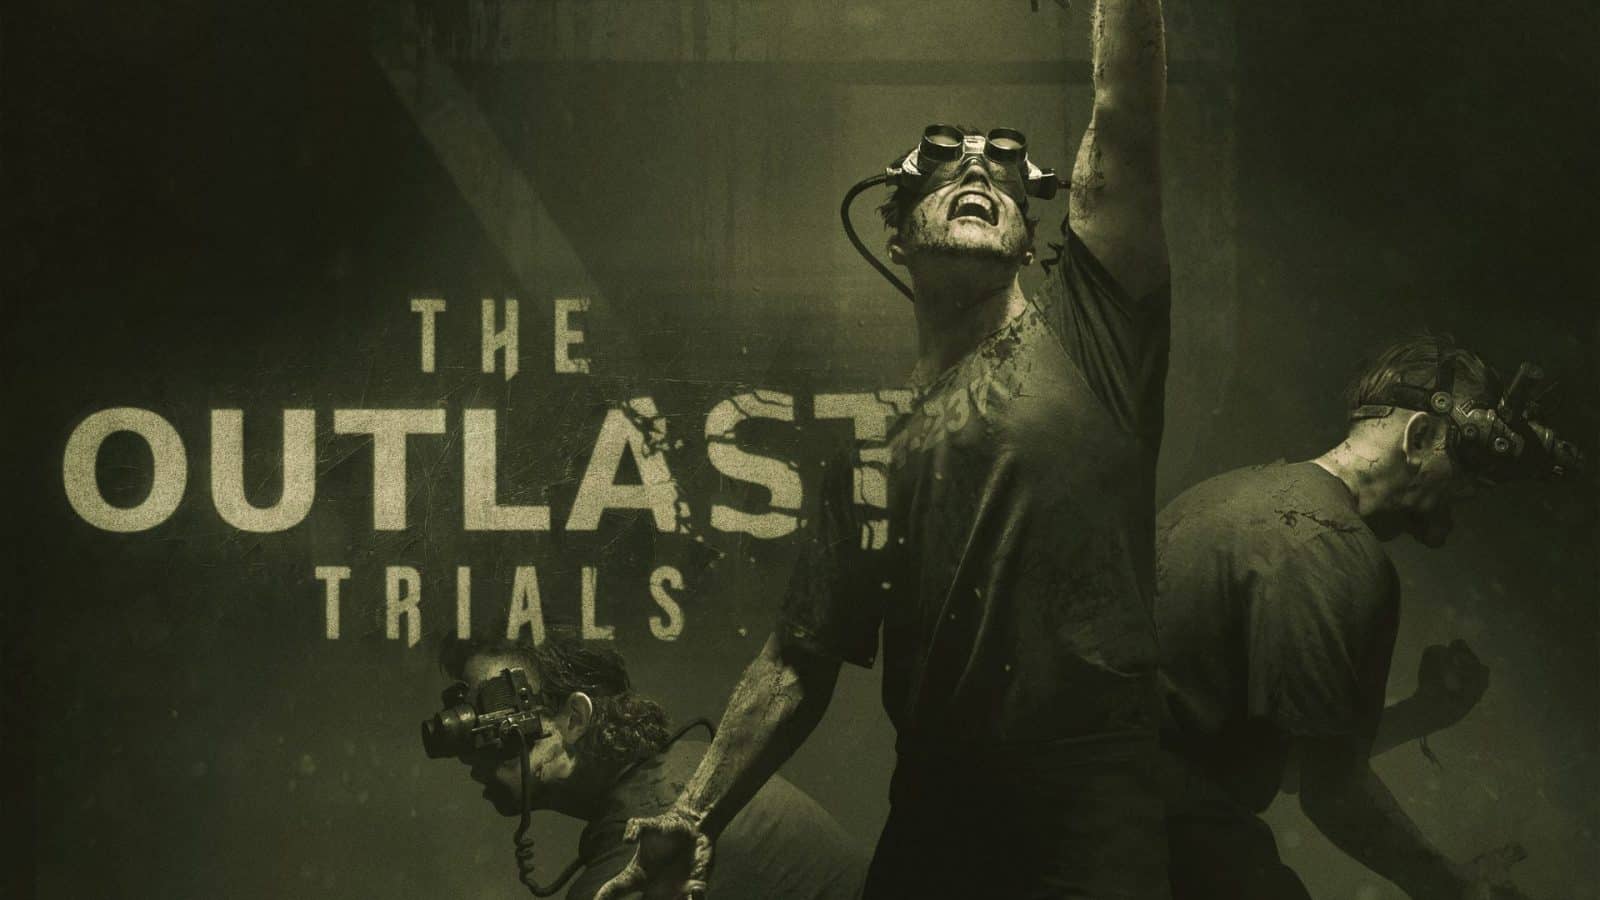 How to Play With Friends - The Outlast Trials Guide - IGN